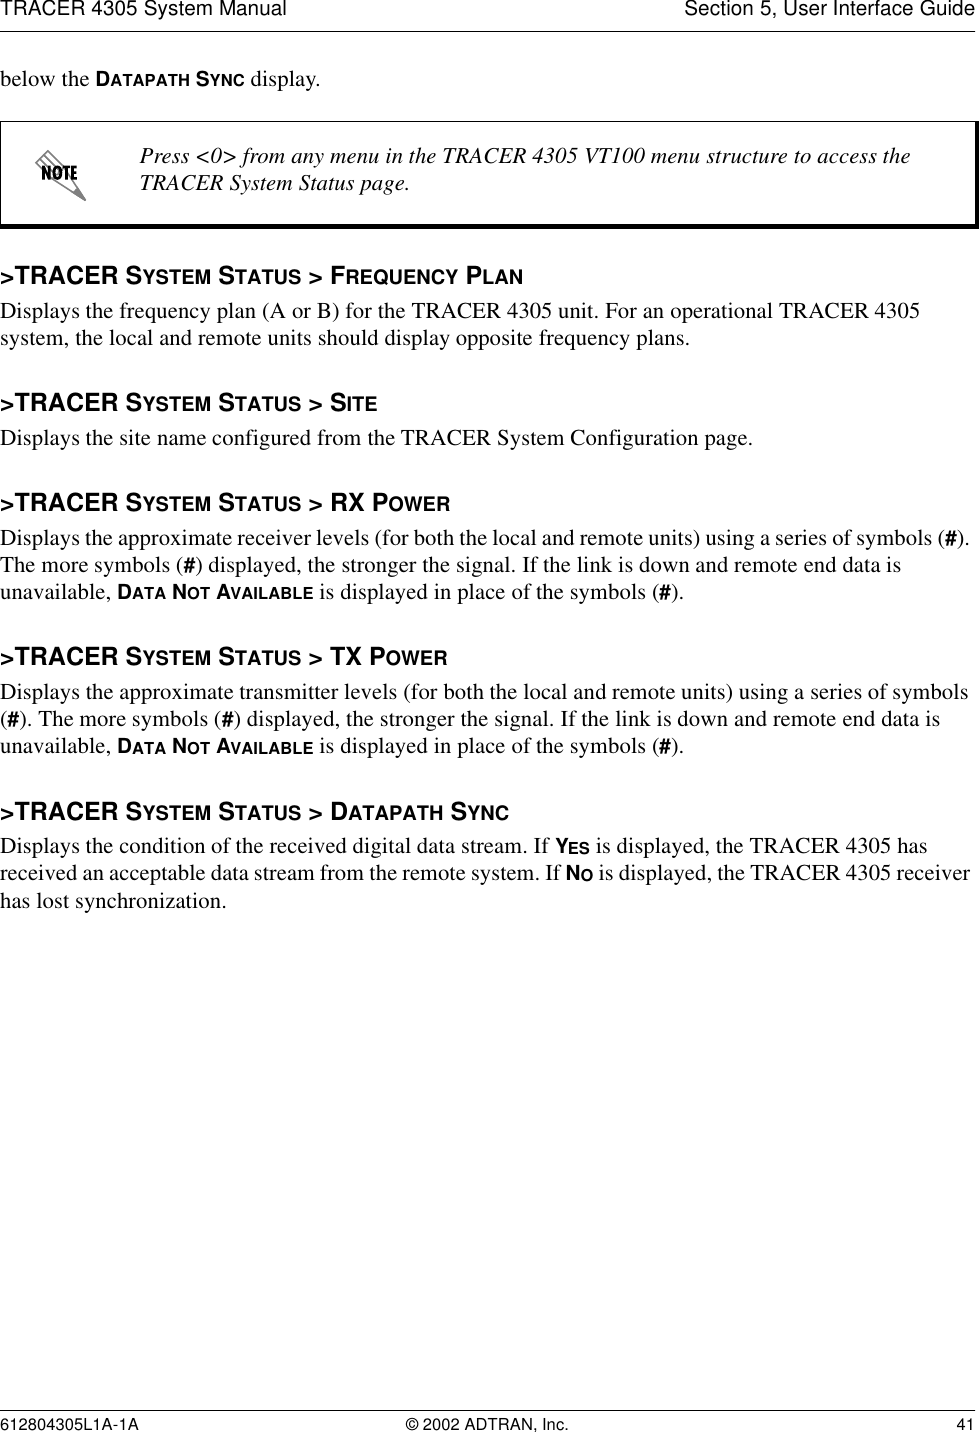 TRACER 4305 System Manual Section 5, User Interface Guide612804305L1A-1A © 2002 ADTRAN, Inc. 41below the DATAPATH SYNC display. &gt;TRACER SYSTEM STATUS &gt; FREQUENCY PLANDisplays the frequency plan (A or B) for the TRACER 4305 unit. For an operational TRACER 4305 system, the local and remote units should display opposite frequency plans.&gt;TRACER SYSTEM STATUS &gt; SITEDisplays the site name configured from the TRACER System Configuration page.&gt;TRACER SYSTEM STATUS &gt; RX POWERDisplays the approximate receiver levels (for both the local and remote units) using a series of symbols (#). The more symbols (#) displayed, the stronger the signal. If the link is down and remote end data is unavailable, DATA NOT AVAILABLE is displayed in place of the symbols (#).&gt;TRACER SYSTEM STATUS &gt; TX POWERDisplays the approximate transmitter levels (for both the local and remote units) using a series of symbols (#). The more symbols (#) displayed, the stronger the signal. If the link is down and remote end data is unavailable, DATA NOT AVAILABLE is displayed in place of the symbols (#).&gt;TRACER SYSTEM STATUS &gt; DATAPATH SYNCDisplays the condition of the received digital data stream. If YES is displayed, the TRACER 4305 has received an acceptable data stream from the remote system. If NO is displayed, the TRACER 4305 receiver has lost synchronization.Press &lt;0&gt; from any menu in the TRACER 4305 VT100 menu structure to access the TRACER System Status page.